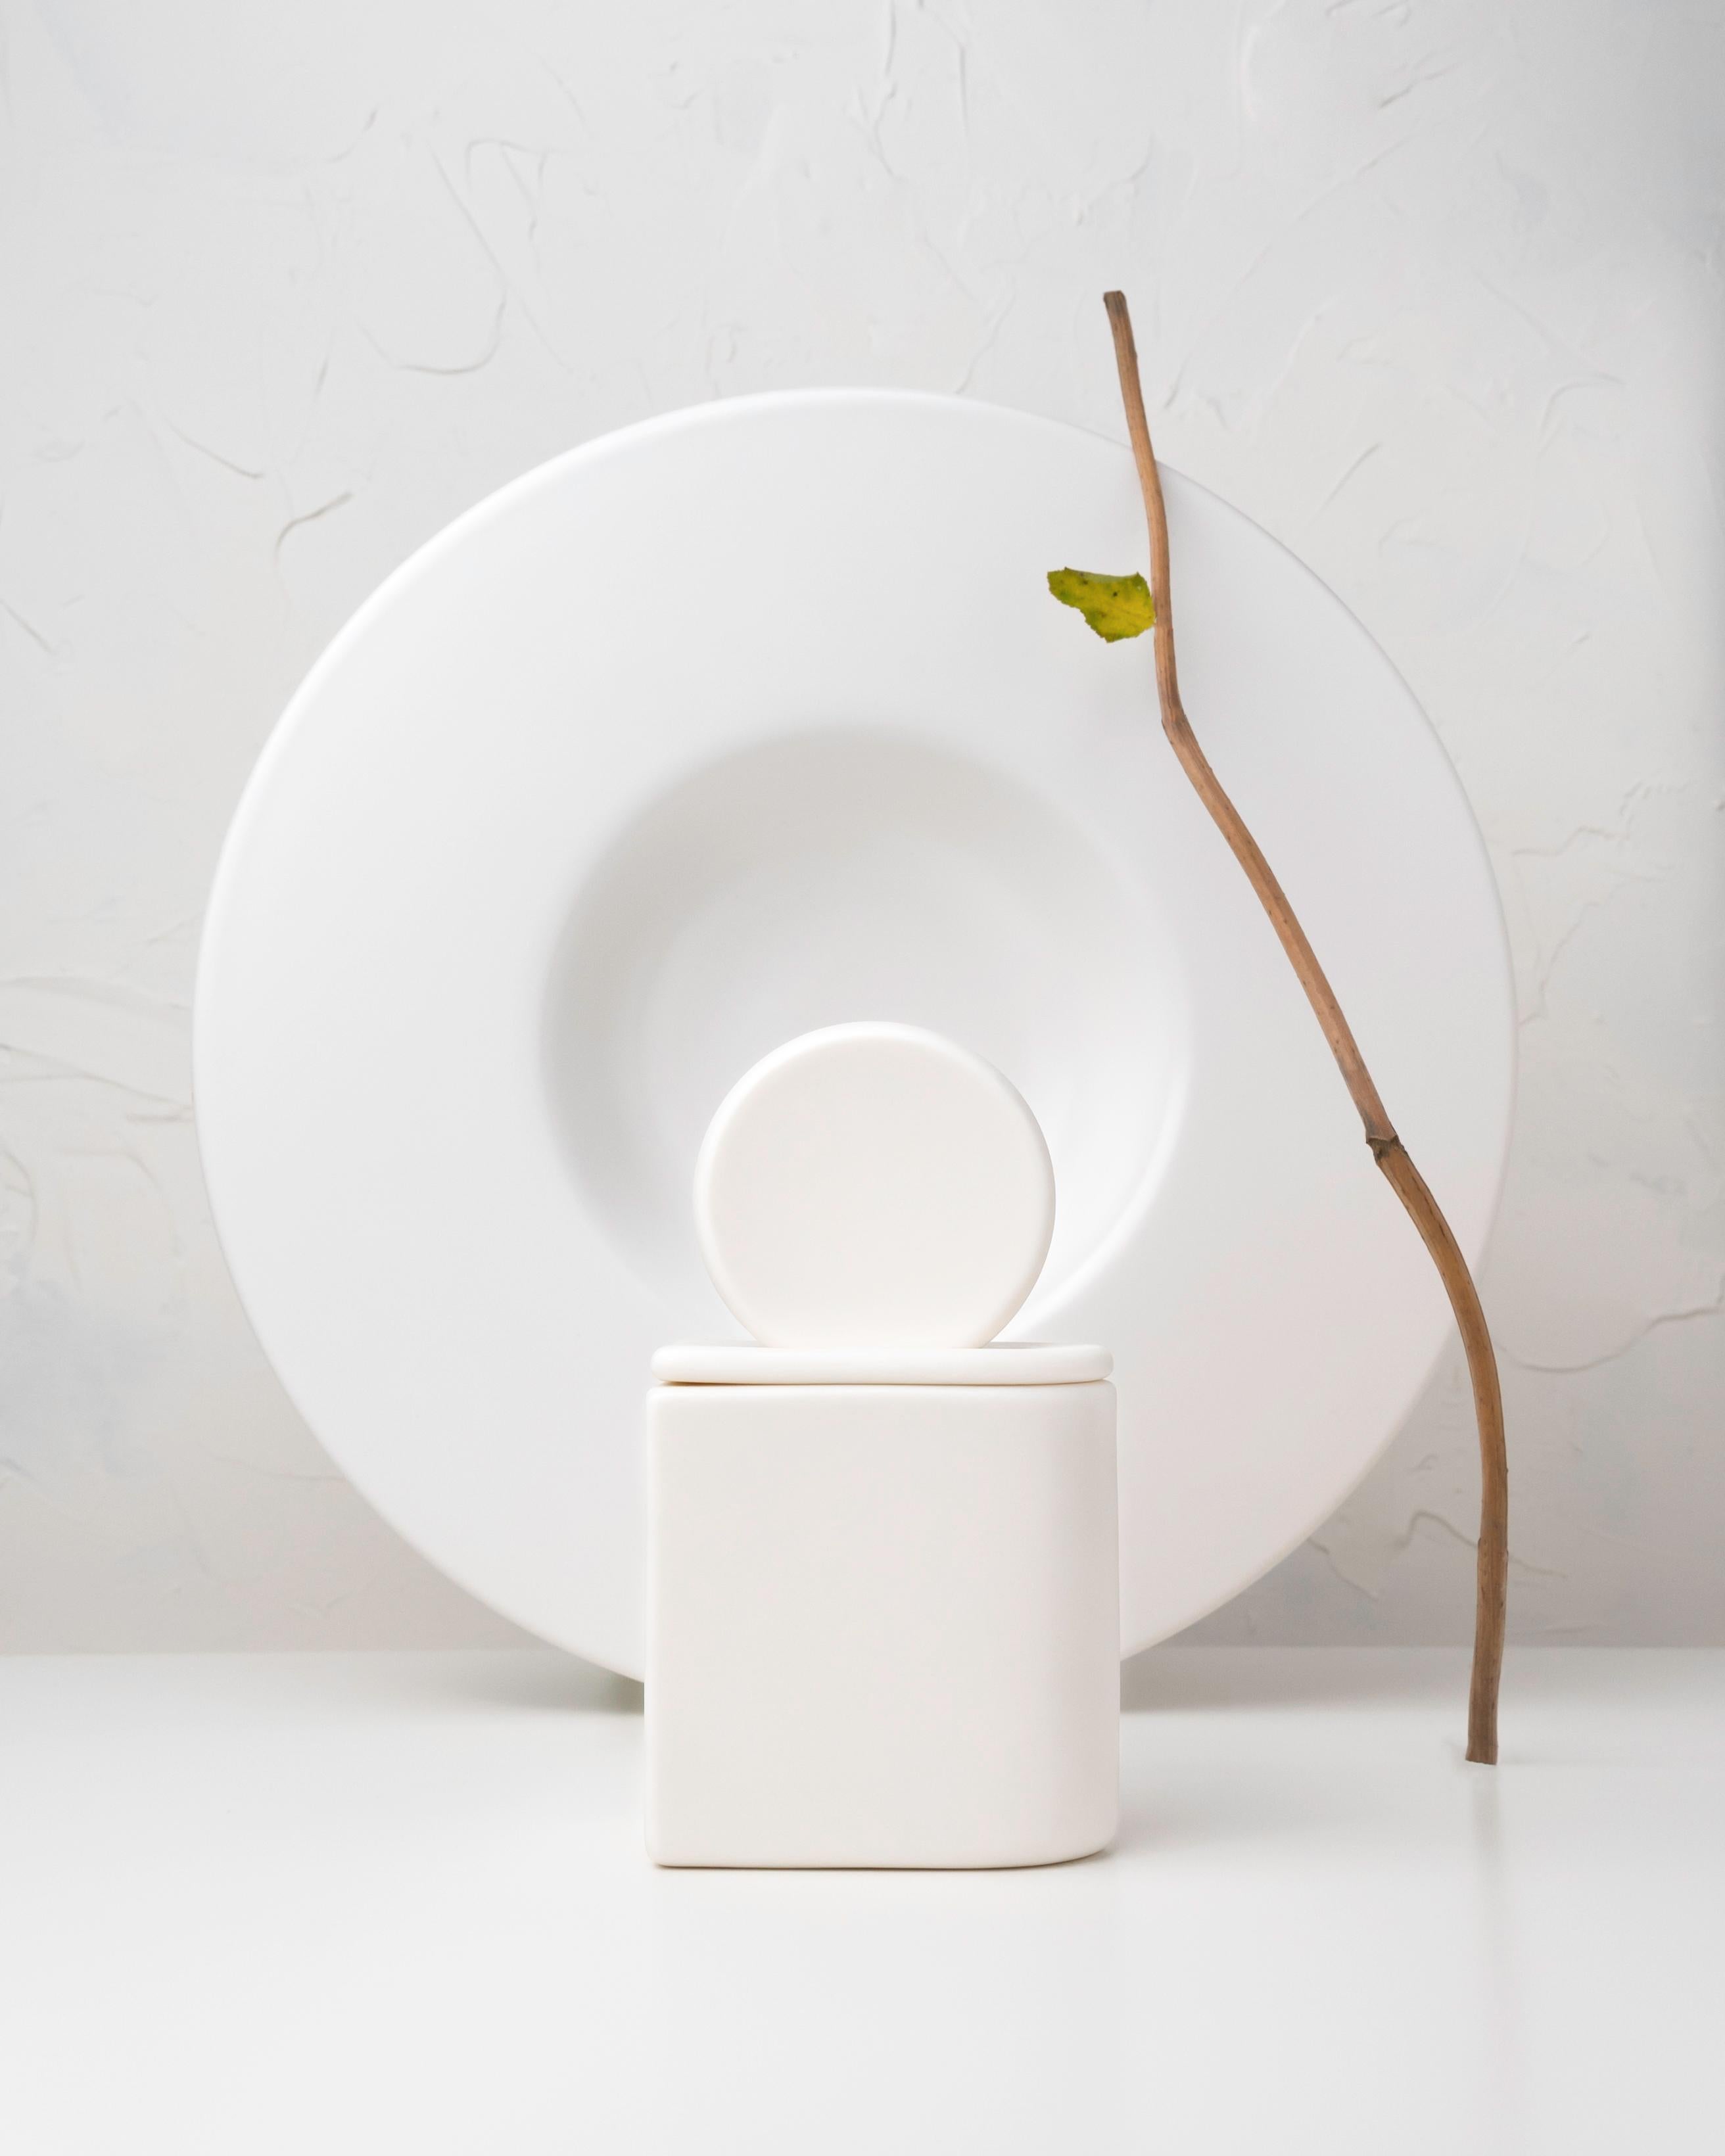 Sunset. A minimalist ceramic container, Parian porcelain. 

A collection inspired by nature and classical forms.

Parian porcelain vessels, unglazed.

• 160 g natural soy wax

• app 30 h burn time

• wooden wick

• fragrance oils composition

•